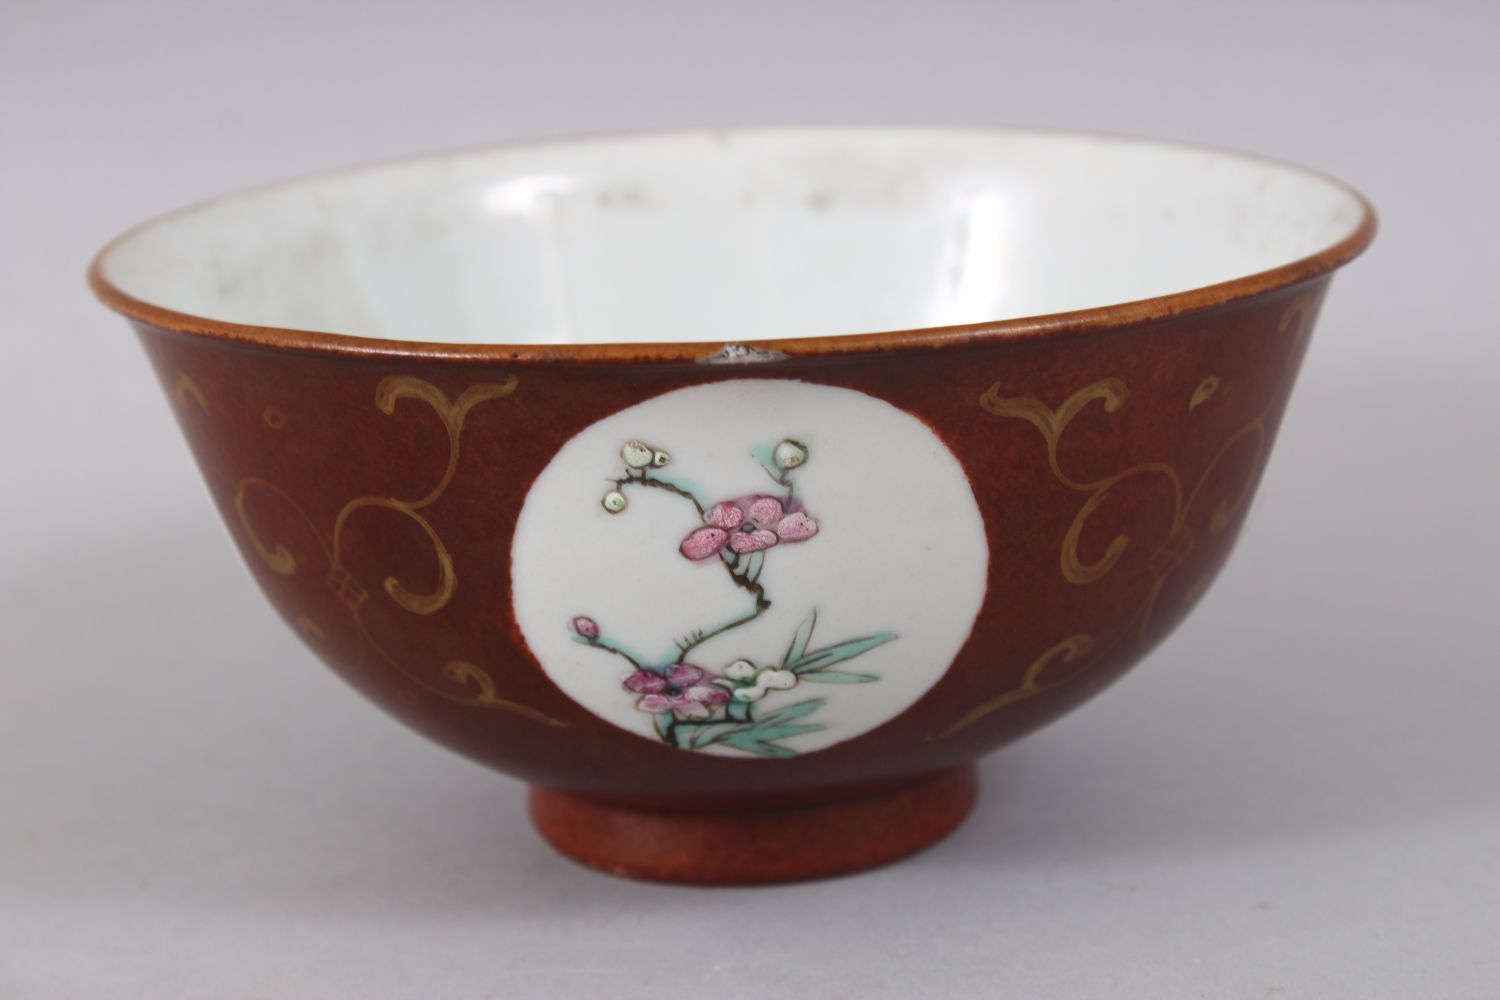 A CHINESE REPUBLIC STYLE BROWN GROUND FAMILLE ROSE PORCELAIN BOWL, with roundel panels of floral - Image 2 of 6